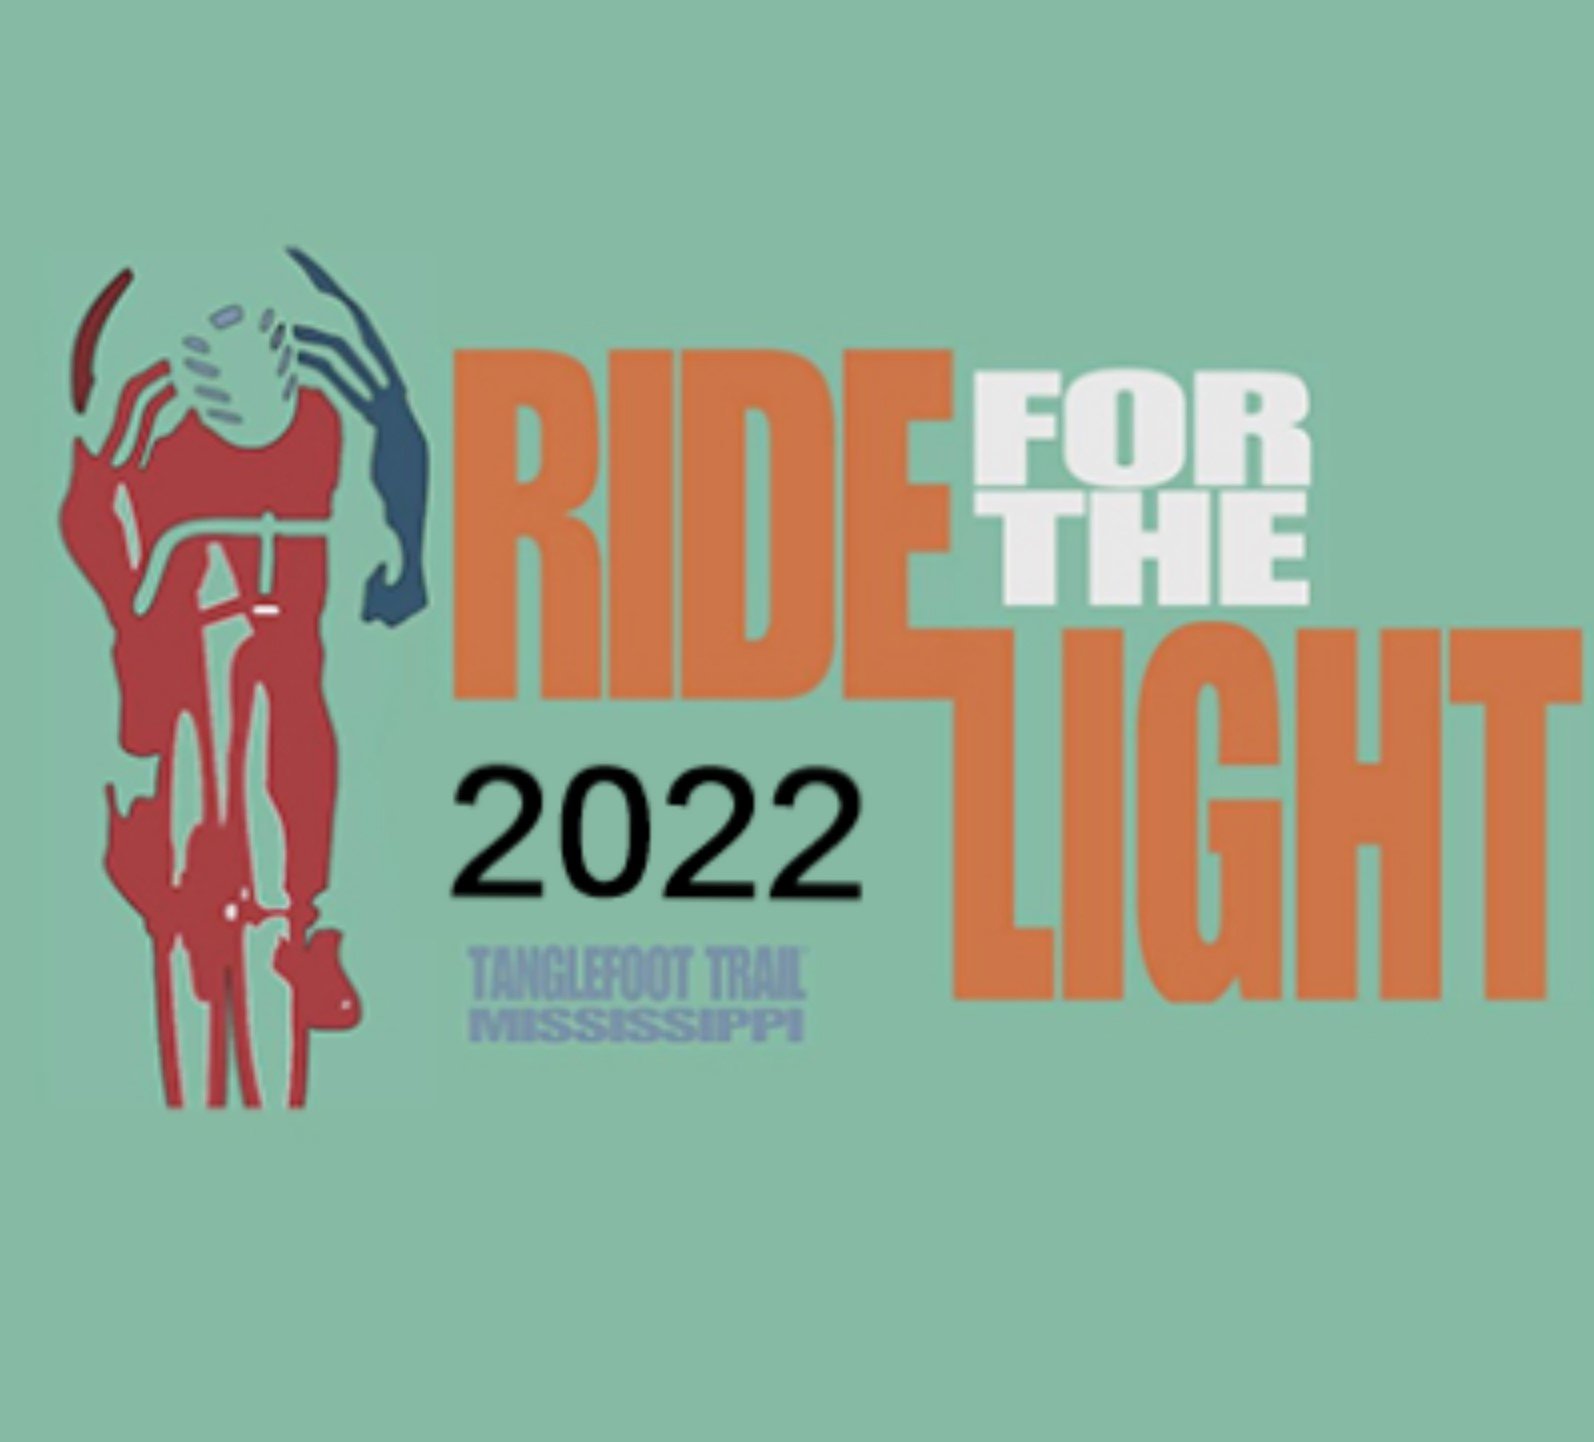 Ride for the light